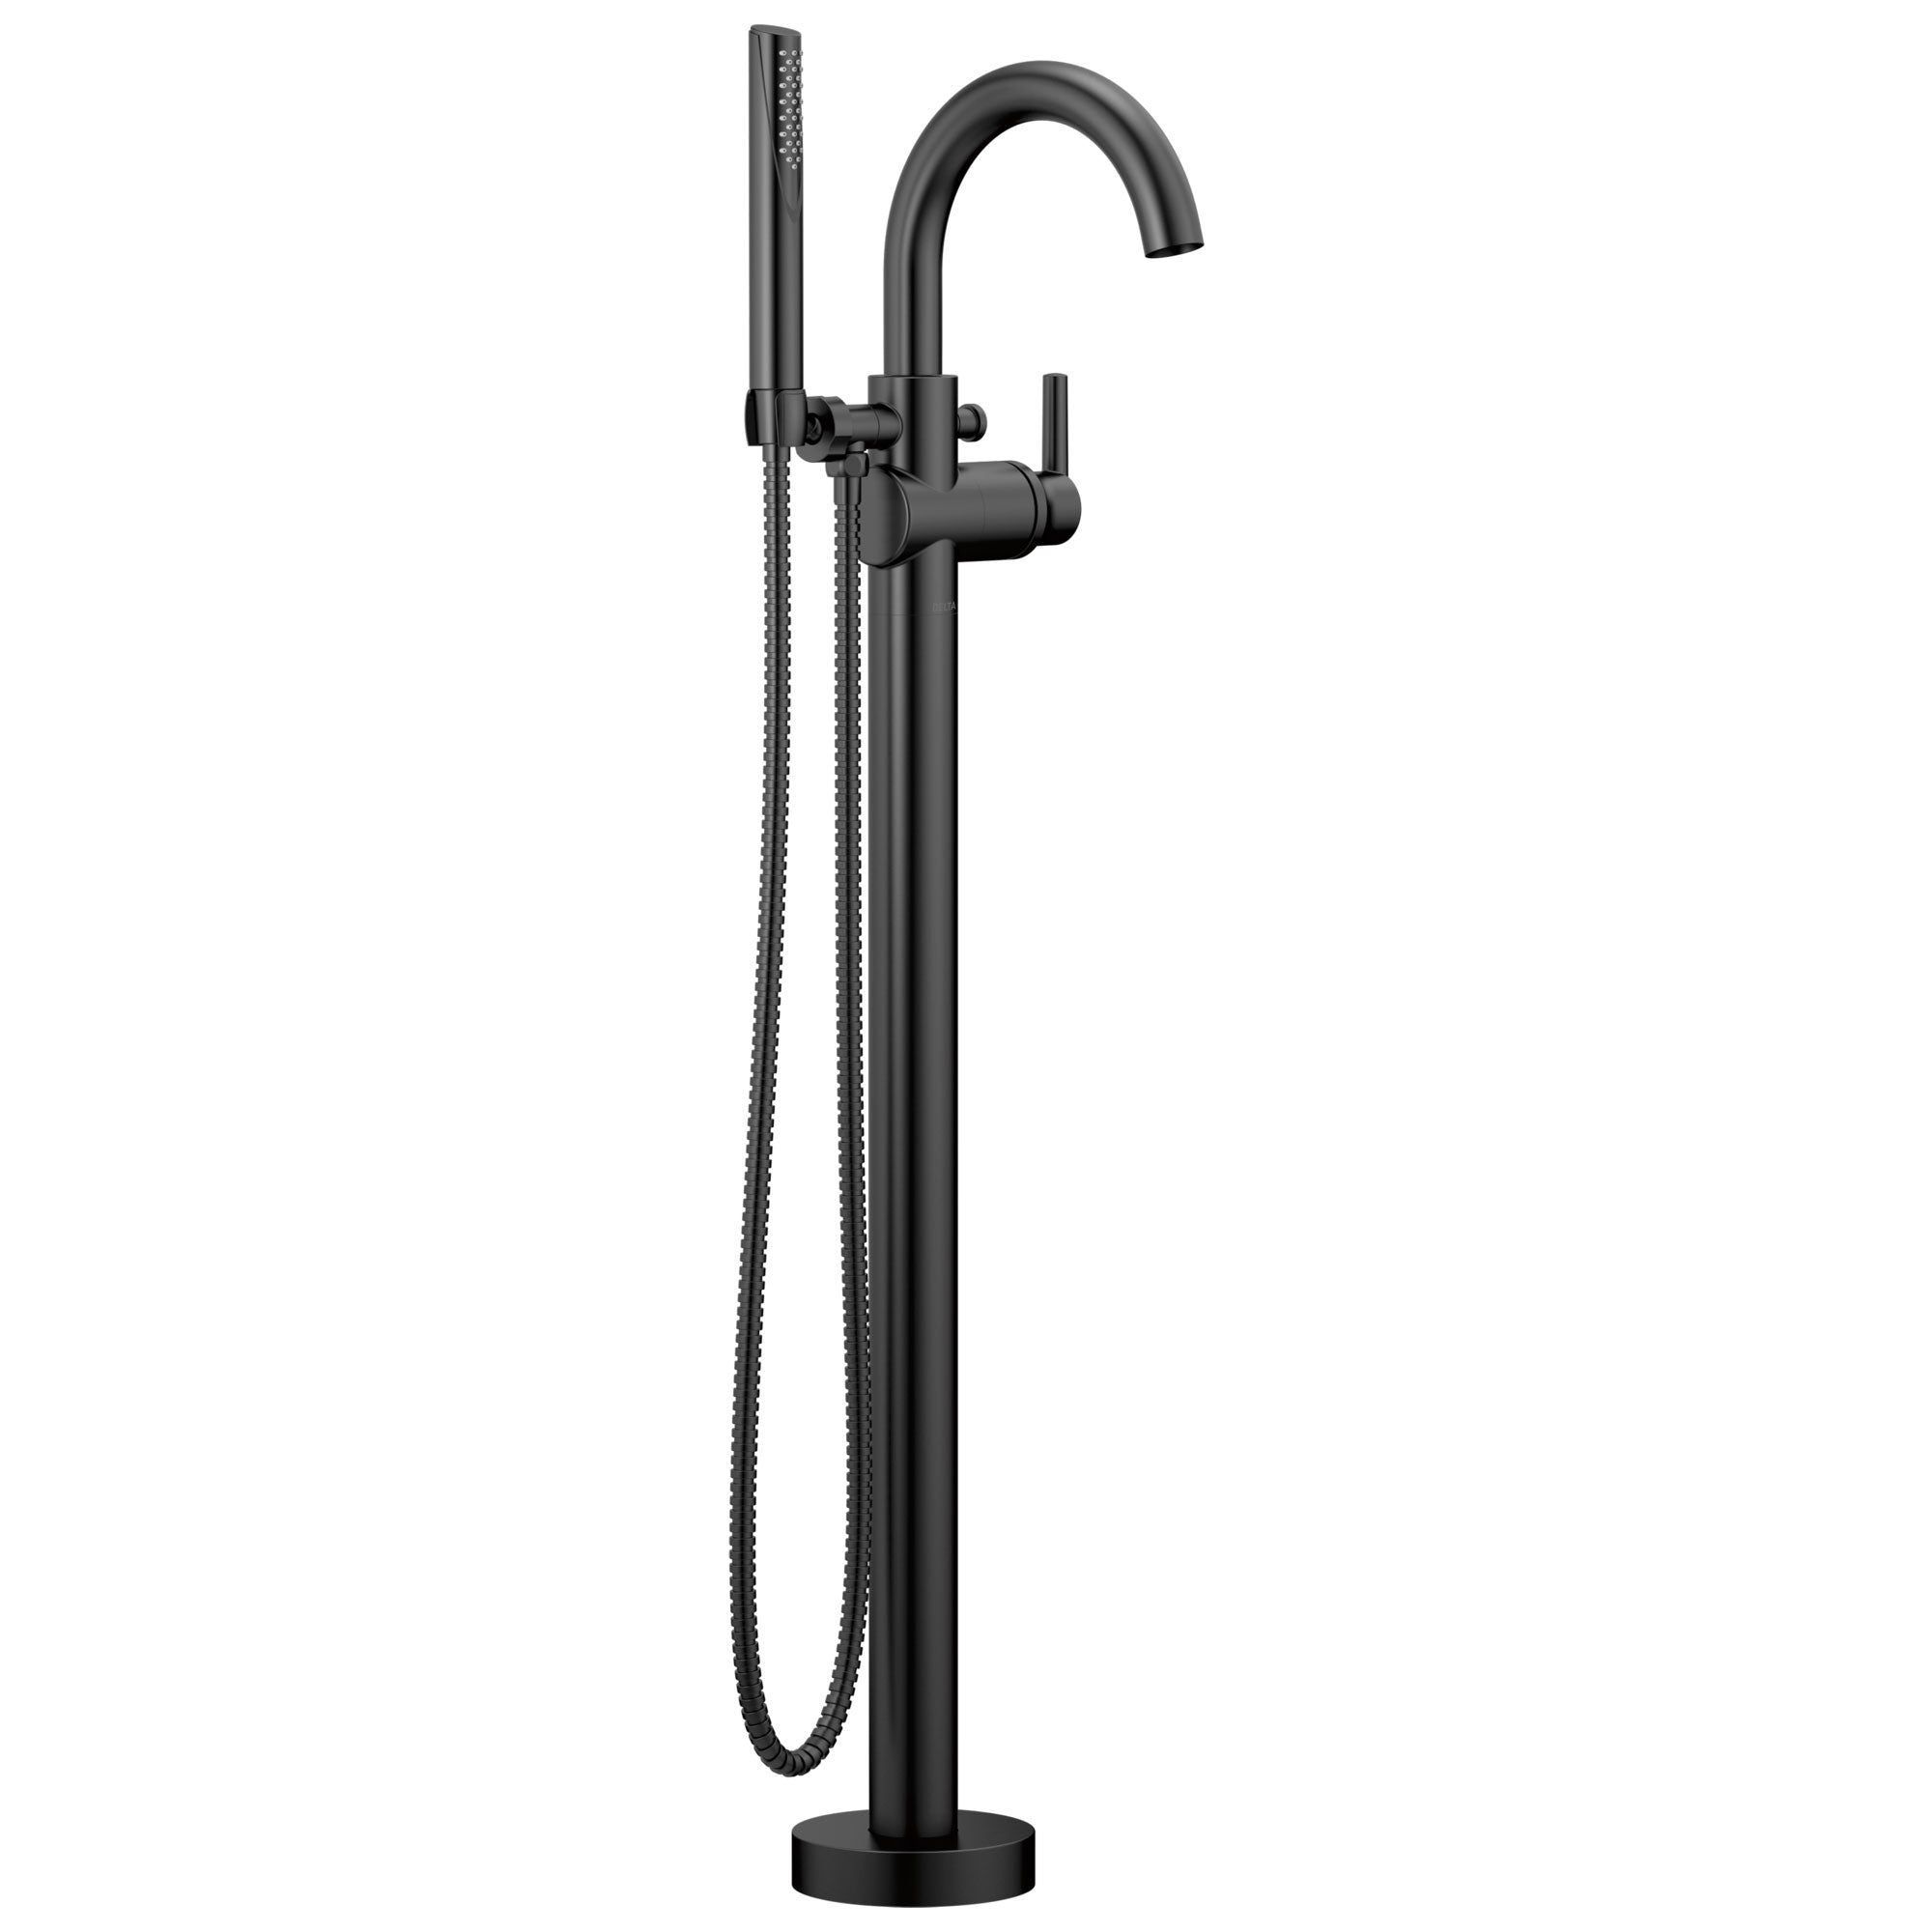 Delta Trinsic Collection Matte Black Finish Contemporary Floor-Mount Free Standing One Handle Tub Filler Faucet Includes Trim Kit and Rough-in Valve D2077V